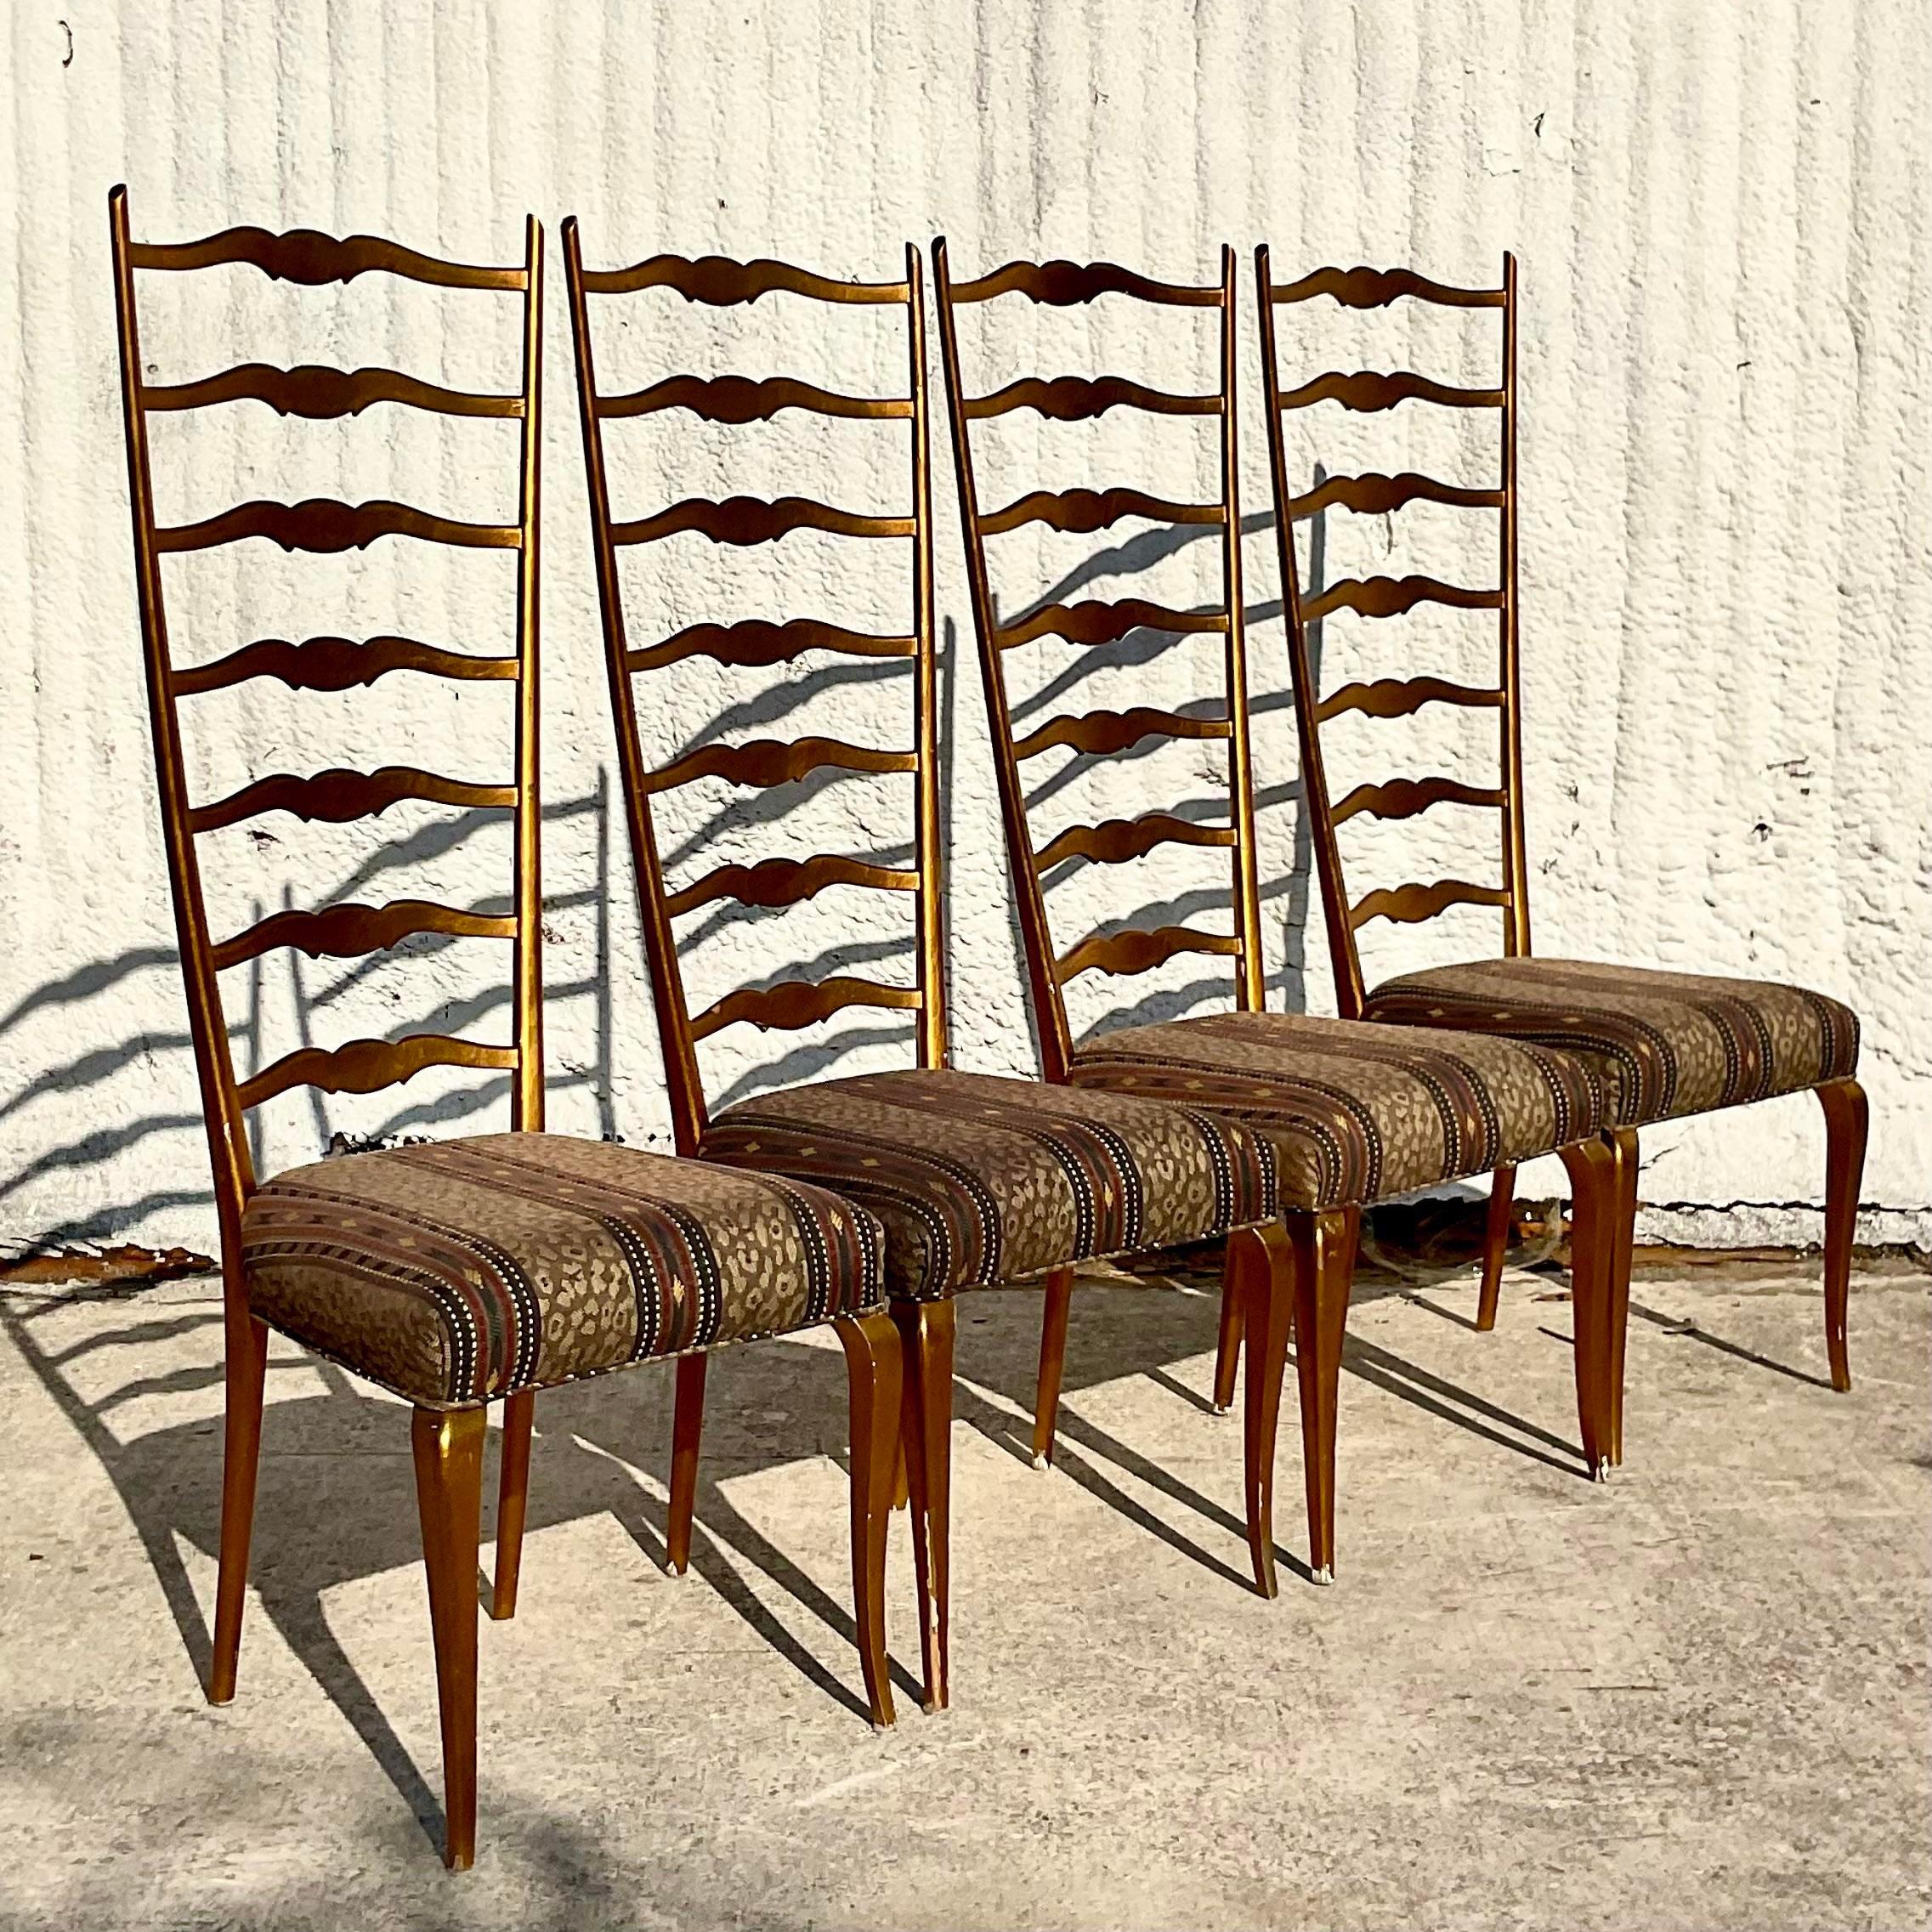 20th Century Vintage Regency Italian Gilt Ladder Back Dining Chairs - Set of 4 For Sale